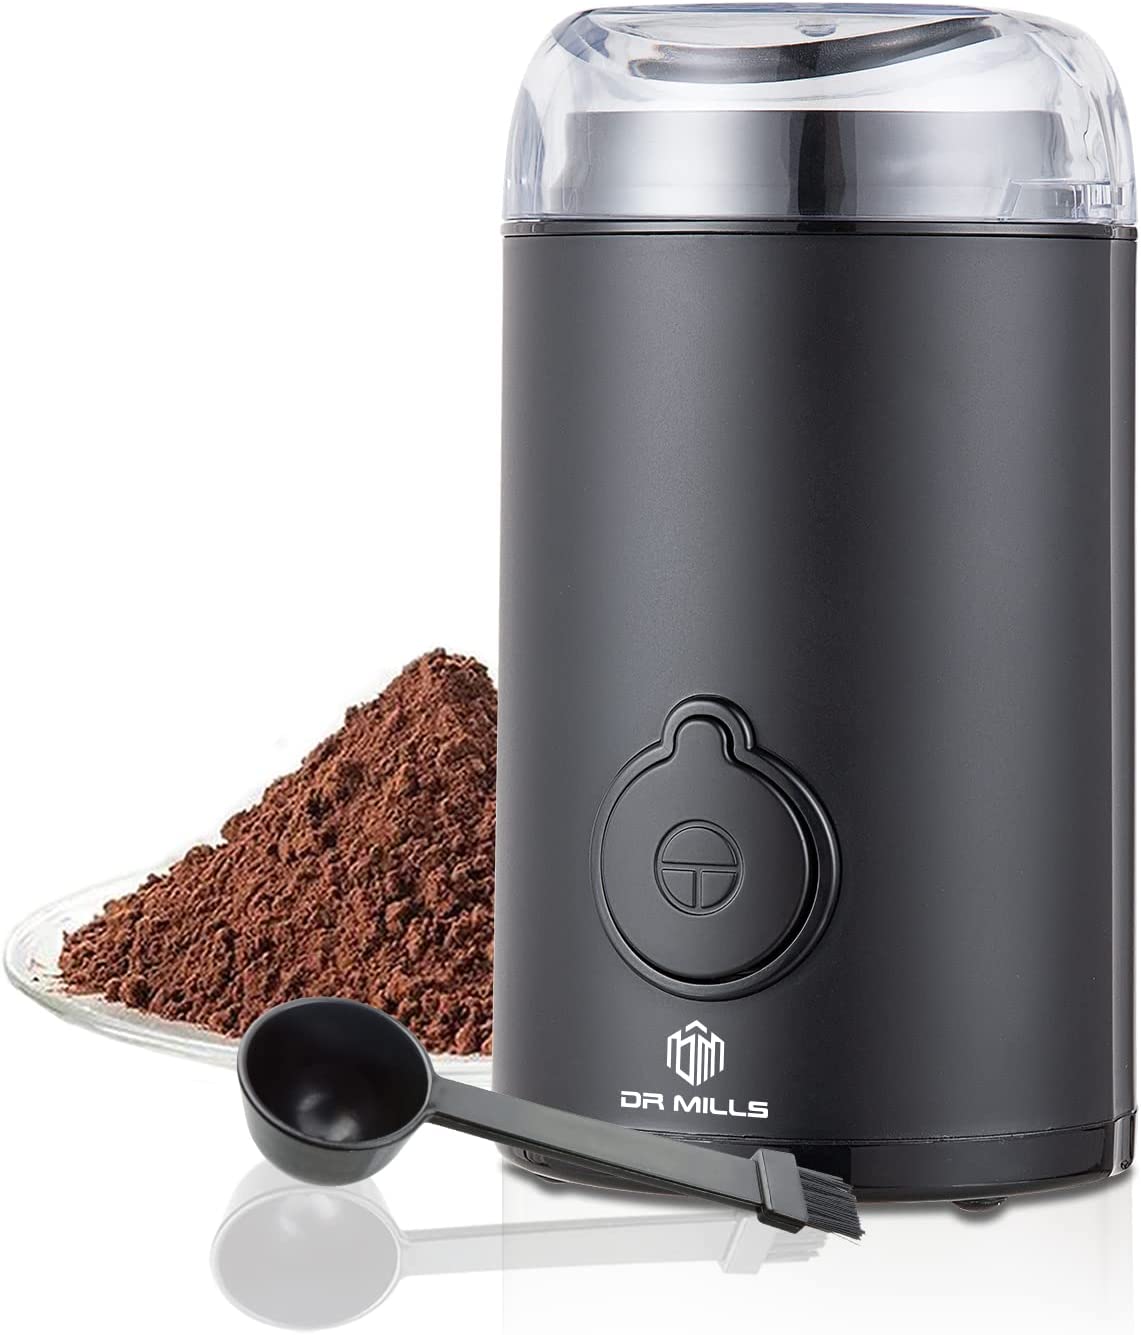 Dr Mills DM-7438 Electric Spice and Coffee Grinder, Knife, Cup Made of Sus304 Stainless Steel